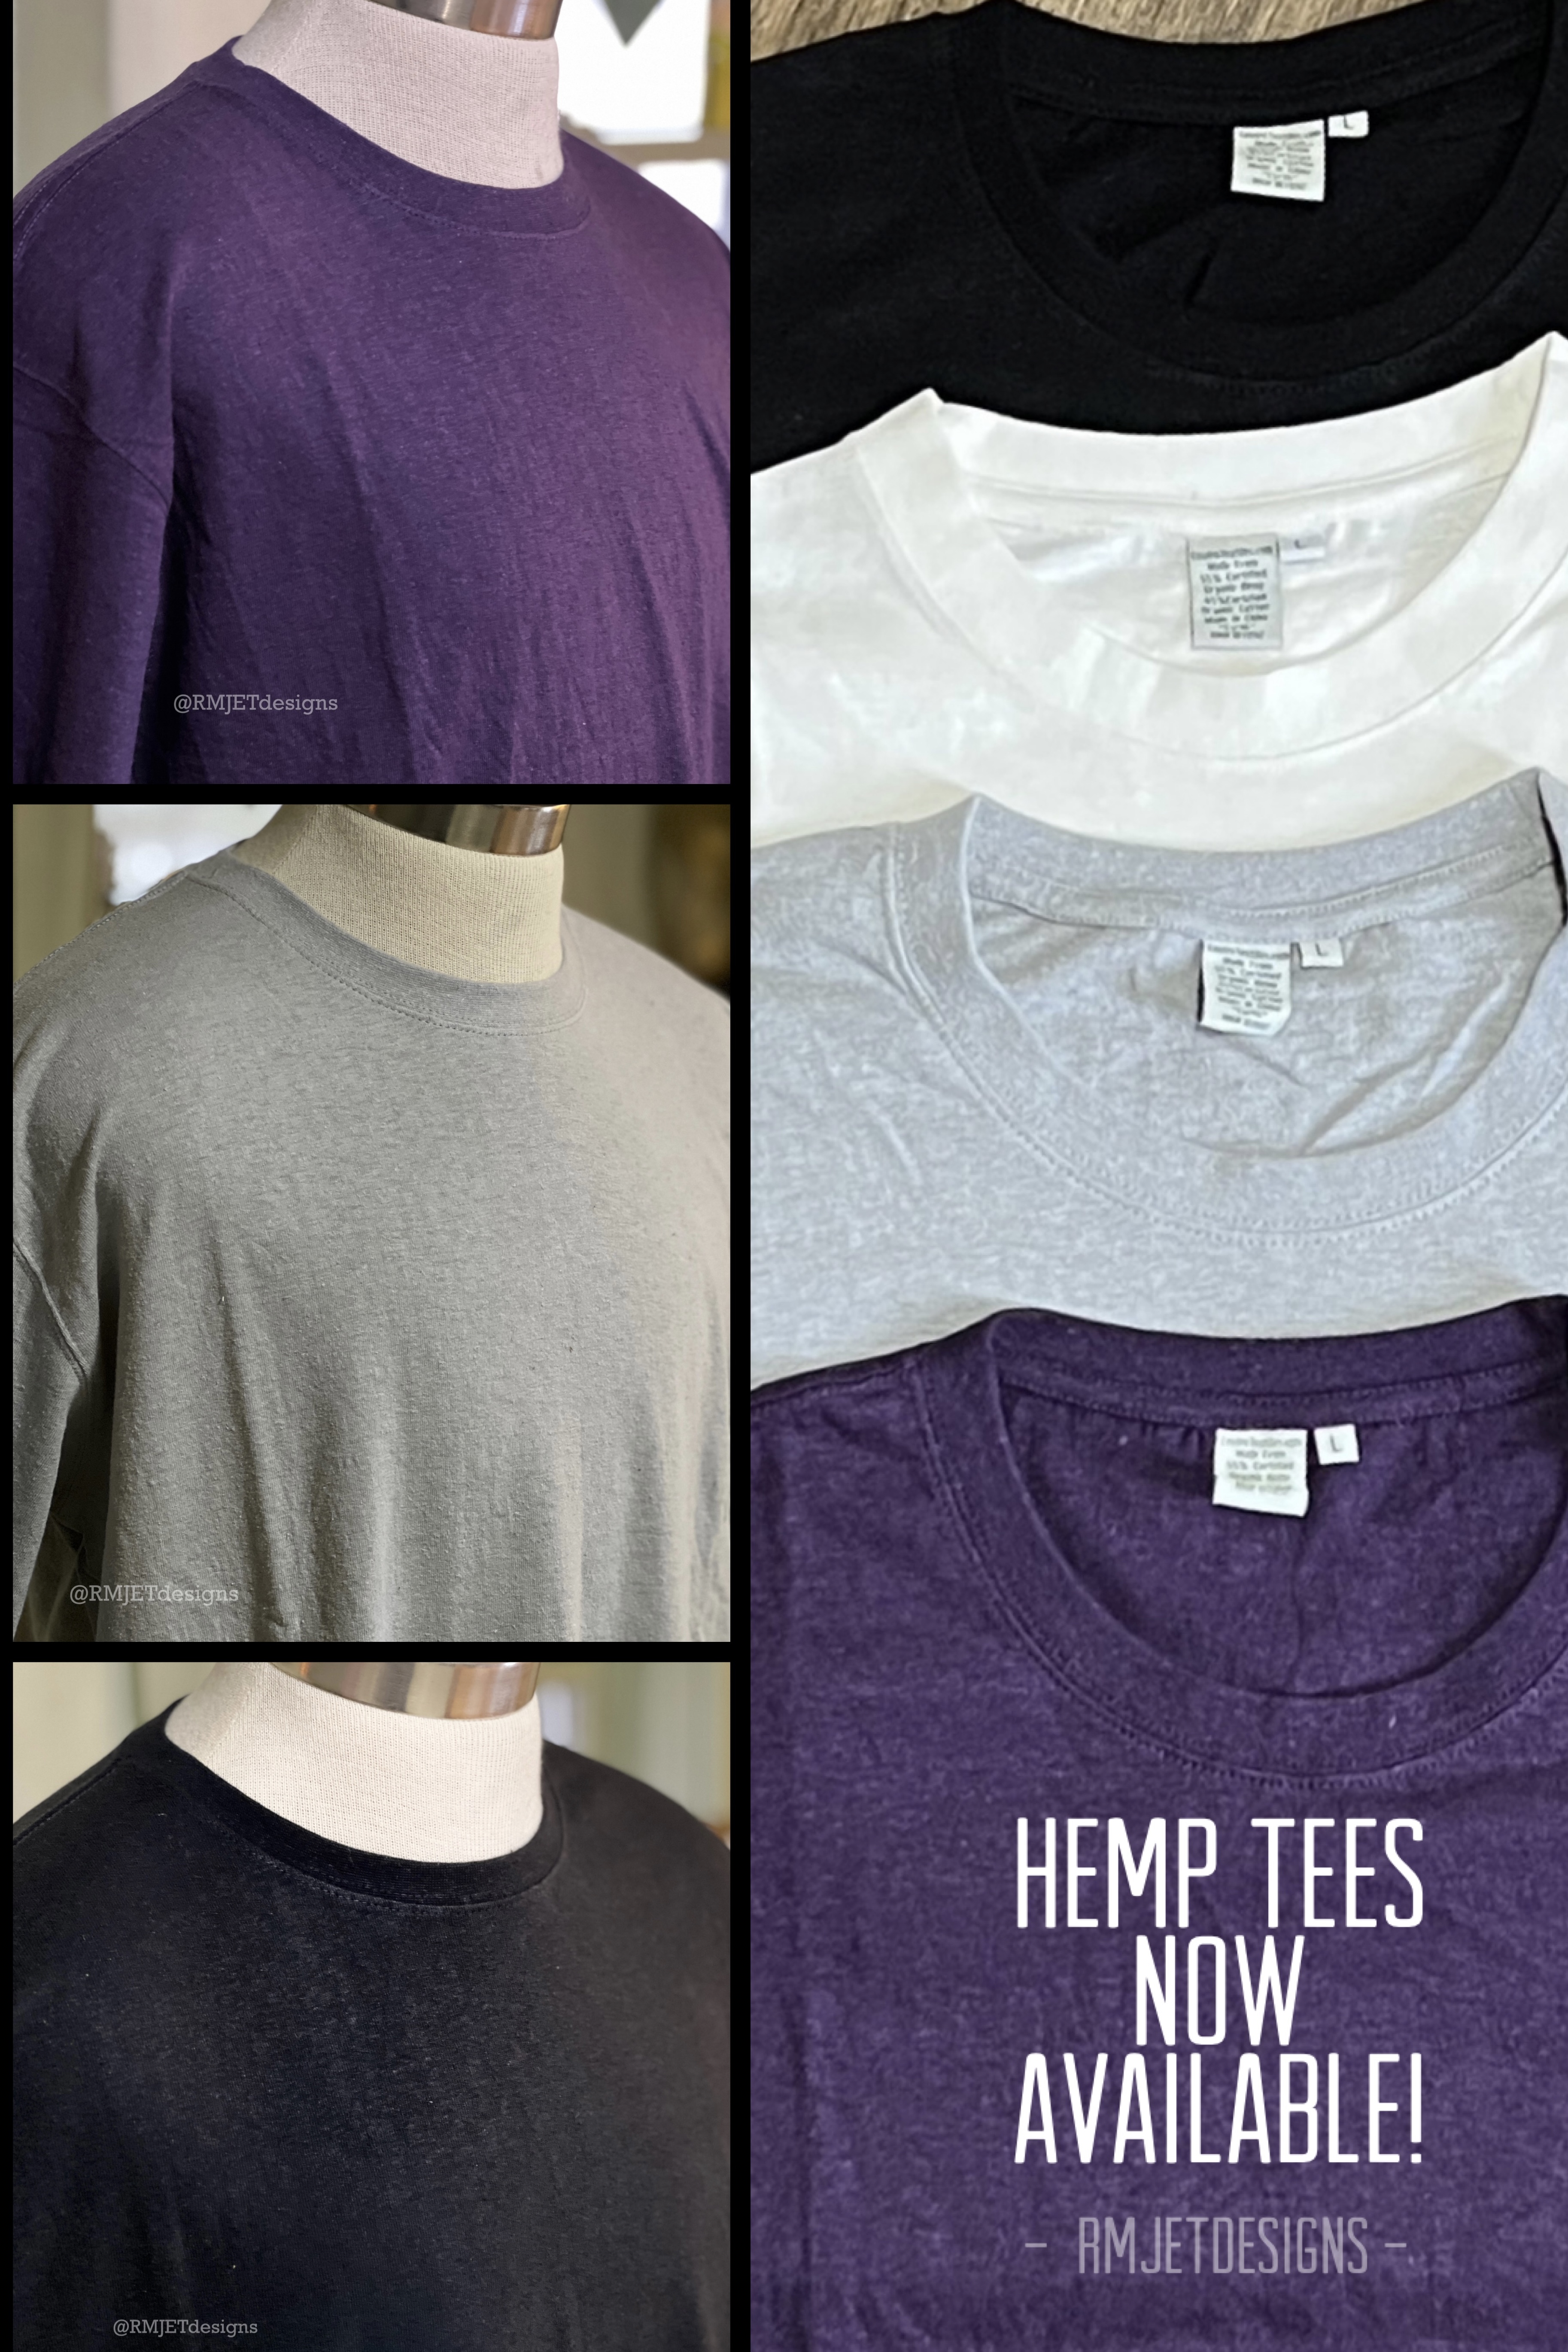 Our Hemp and Organic Cotton T Shirts Available In Two Sizes By RMJETdesigns